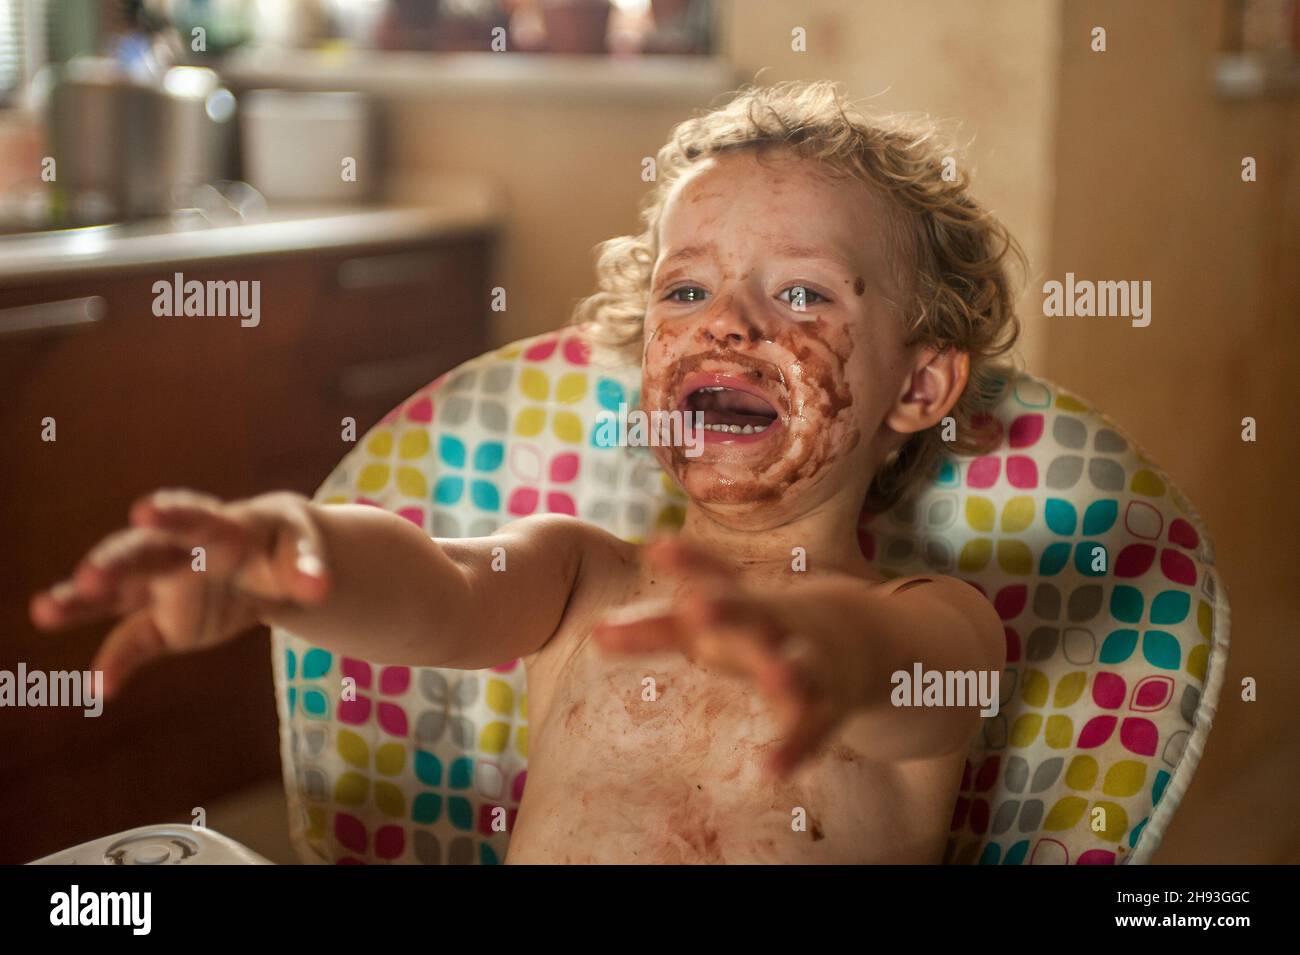 A baby girl (age 2 1/2 years) screams and cries while sitting on a high chair and covered in chocolate ice-cream. Stock Photo